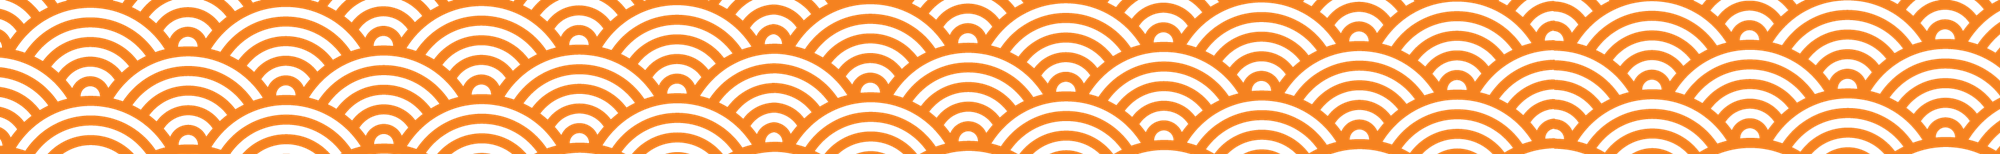 Backgrounds - Asian Pacific Patterns - Orange